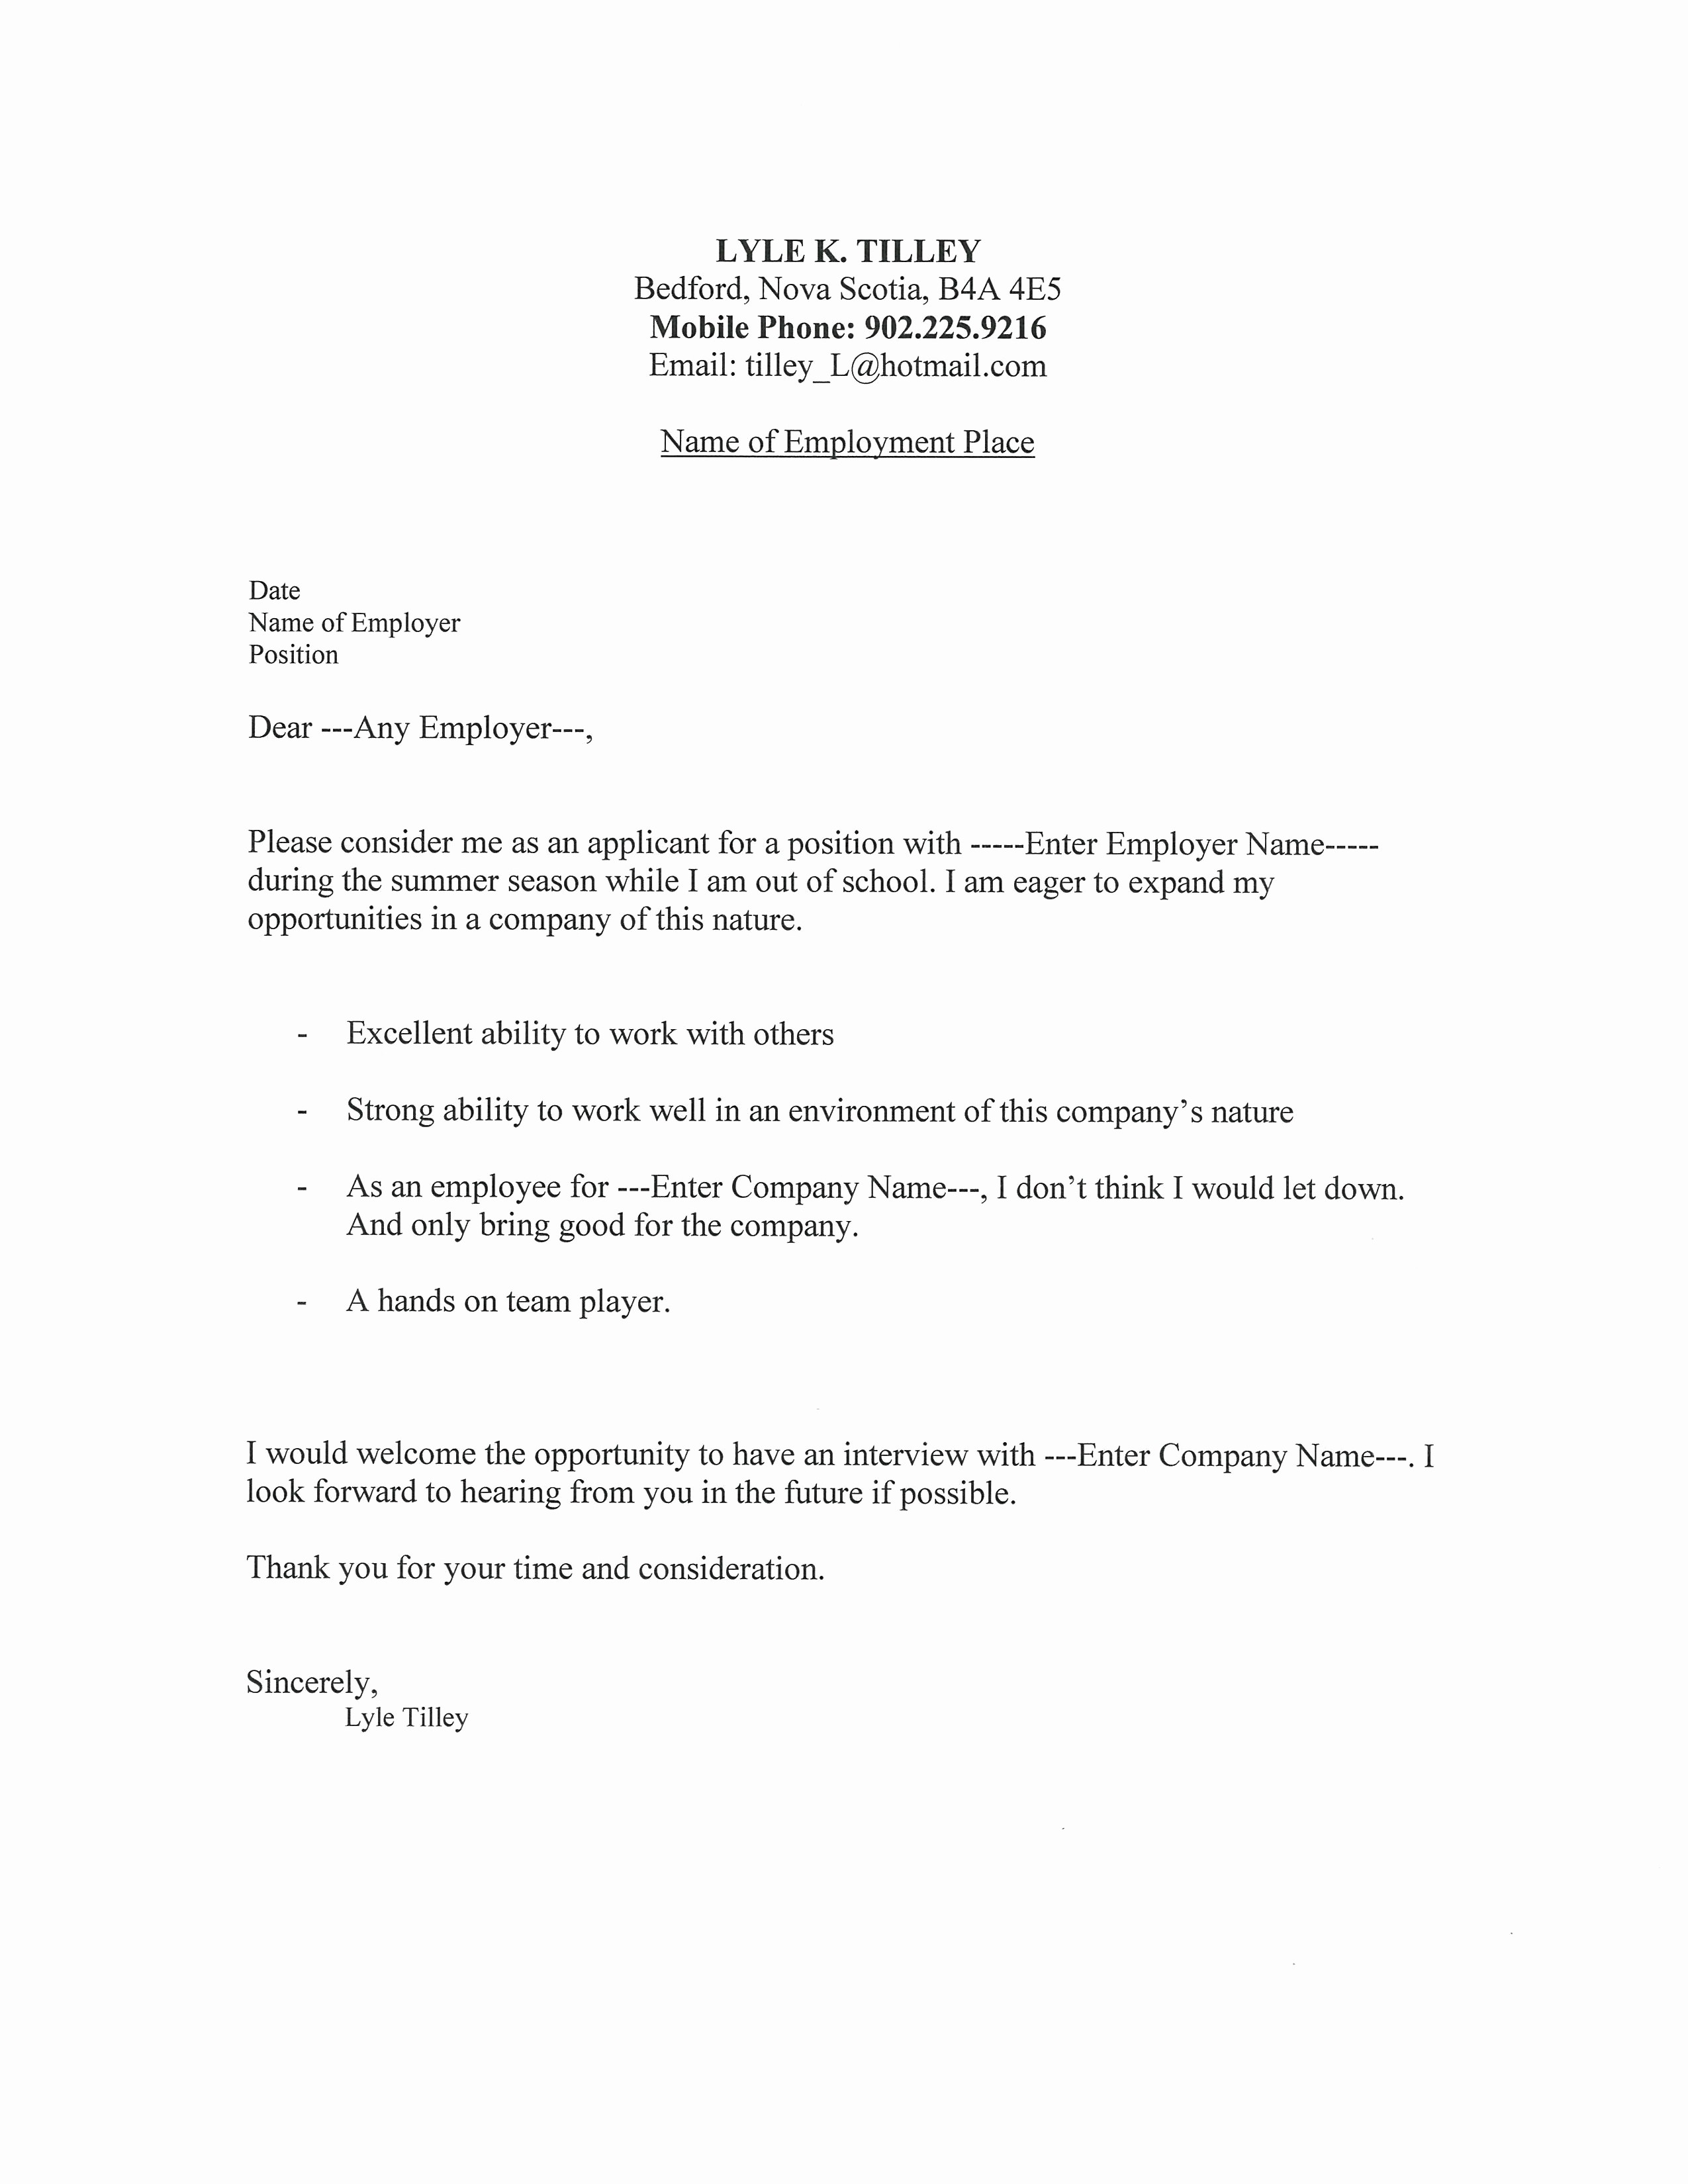 Free Resume Cover Letter Samples Awesome Examples Cover Letter for Resume Template